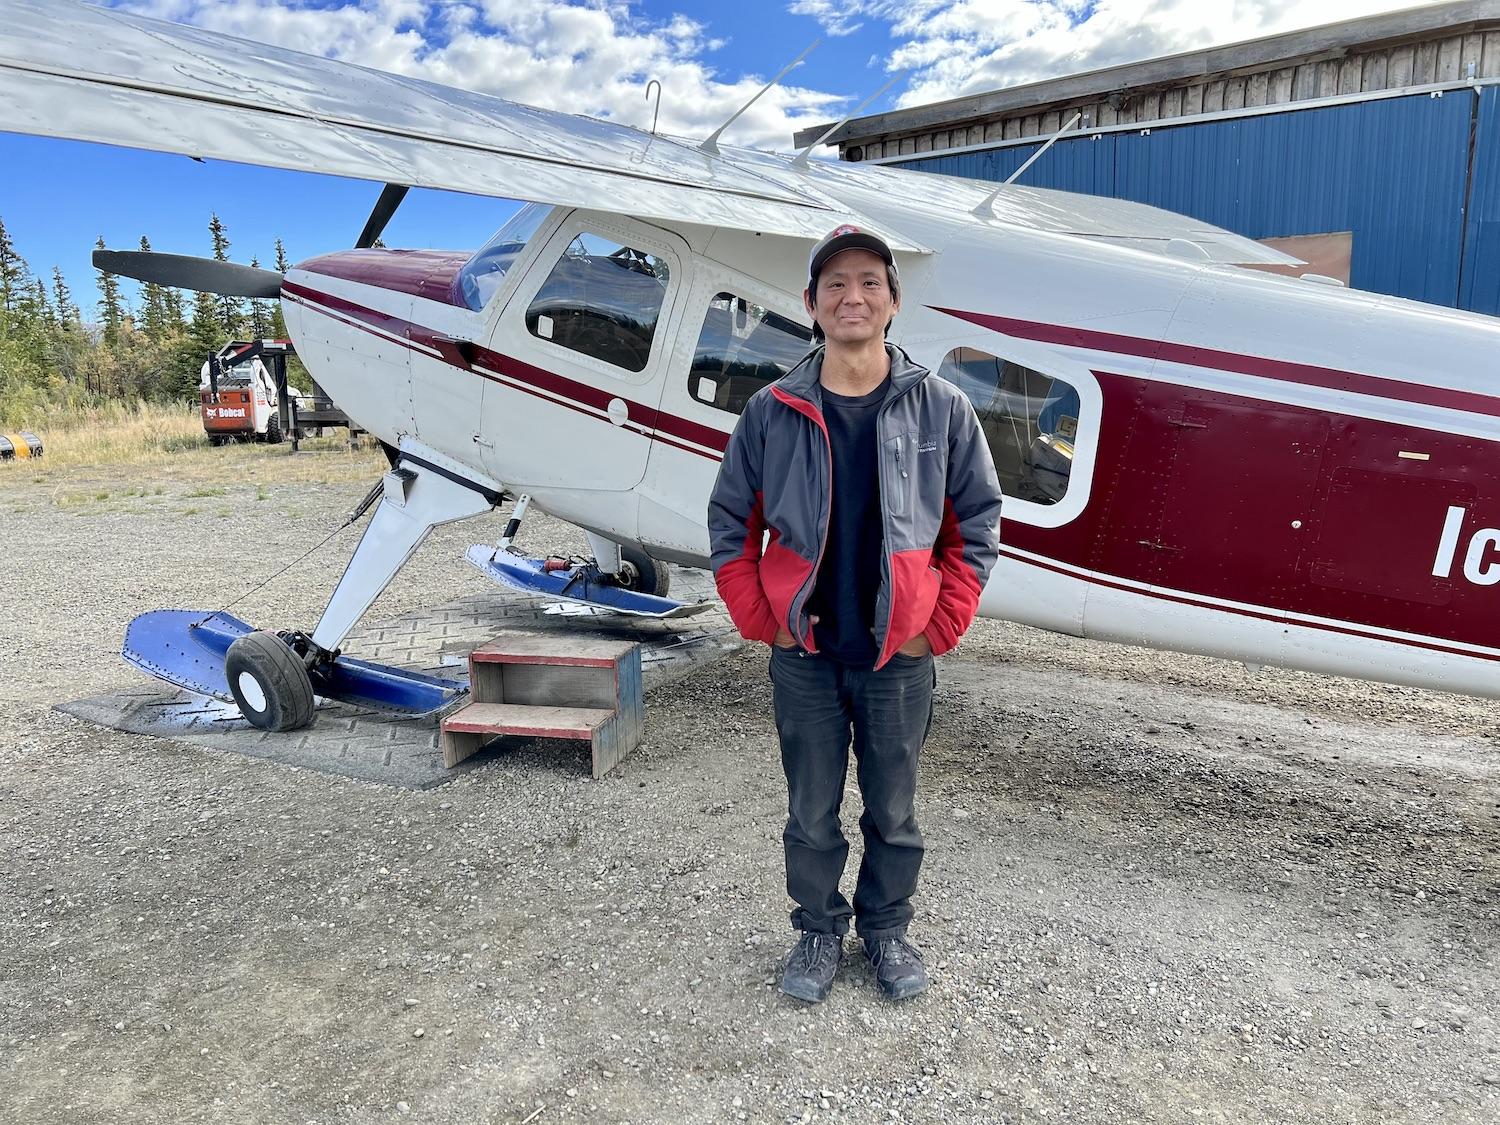 This is the plane that Icefield Discovery pilot Kensuke Miara flies in Kluane for glacier and mountain flightseeing tours.